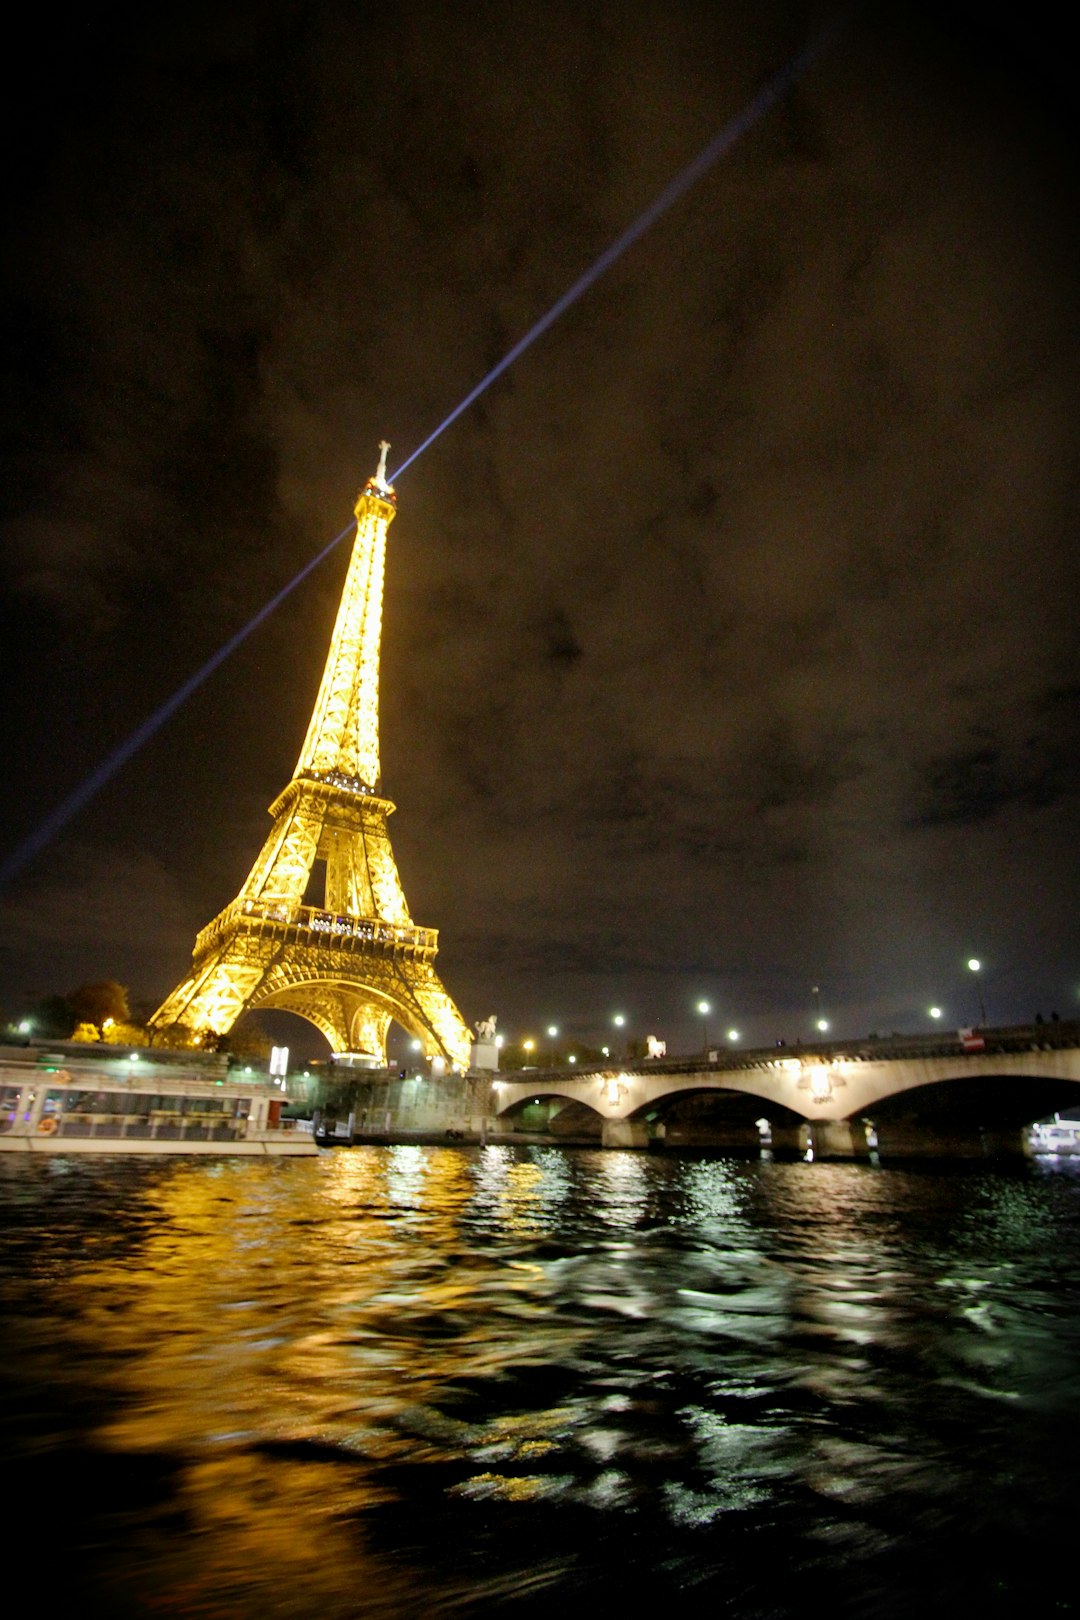 A night-time shot of the brightly lit Eiffel Tower in Paris.